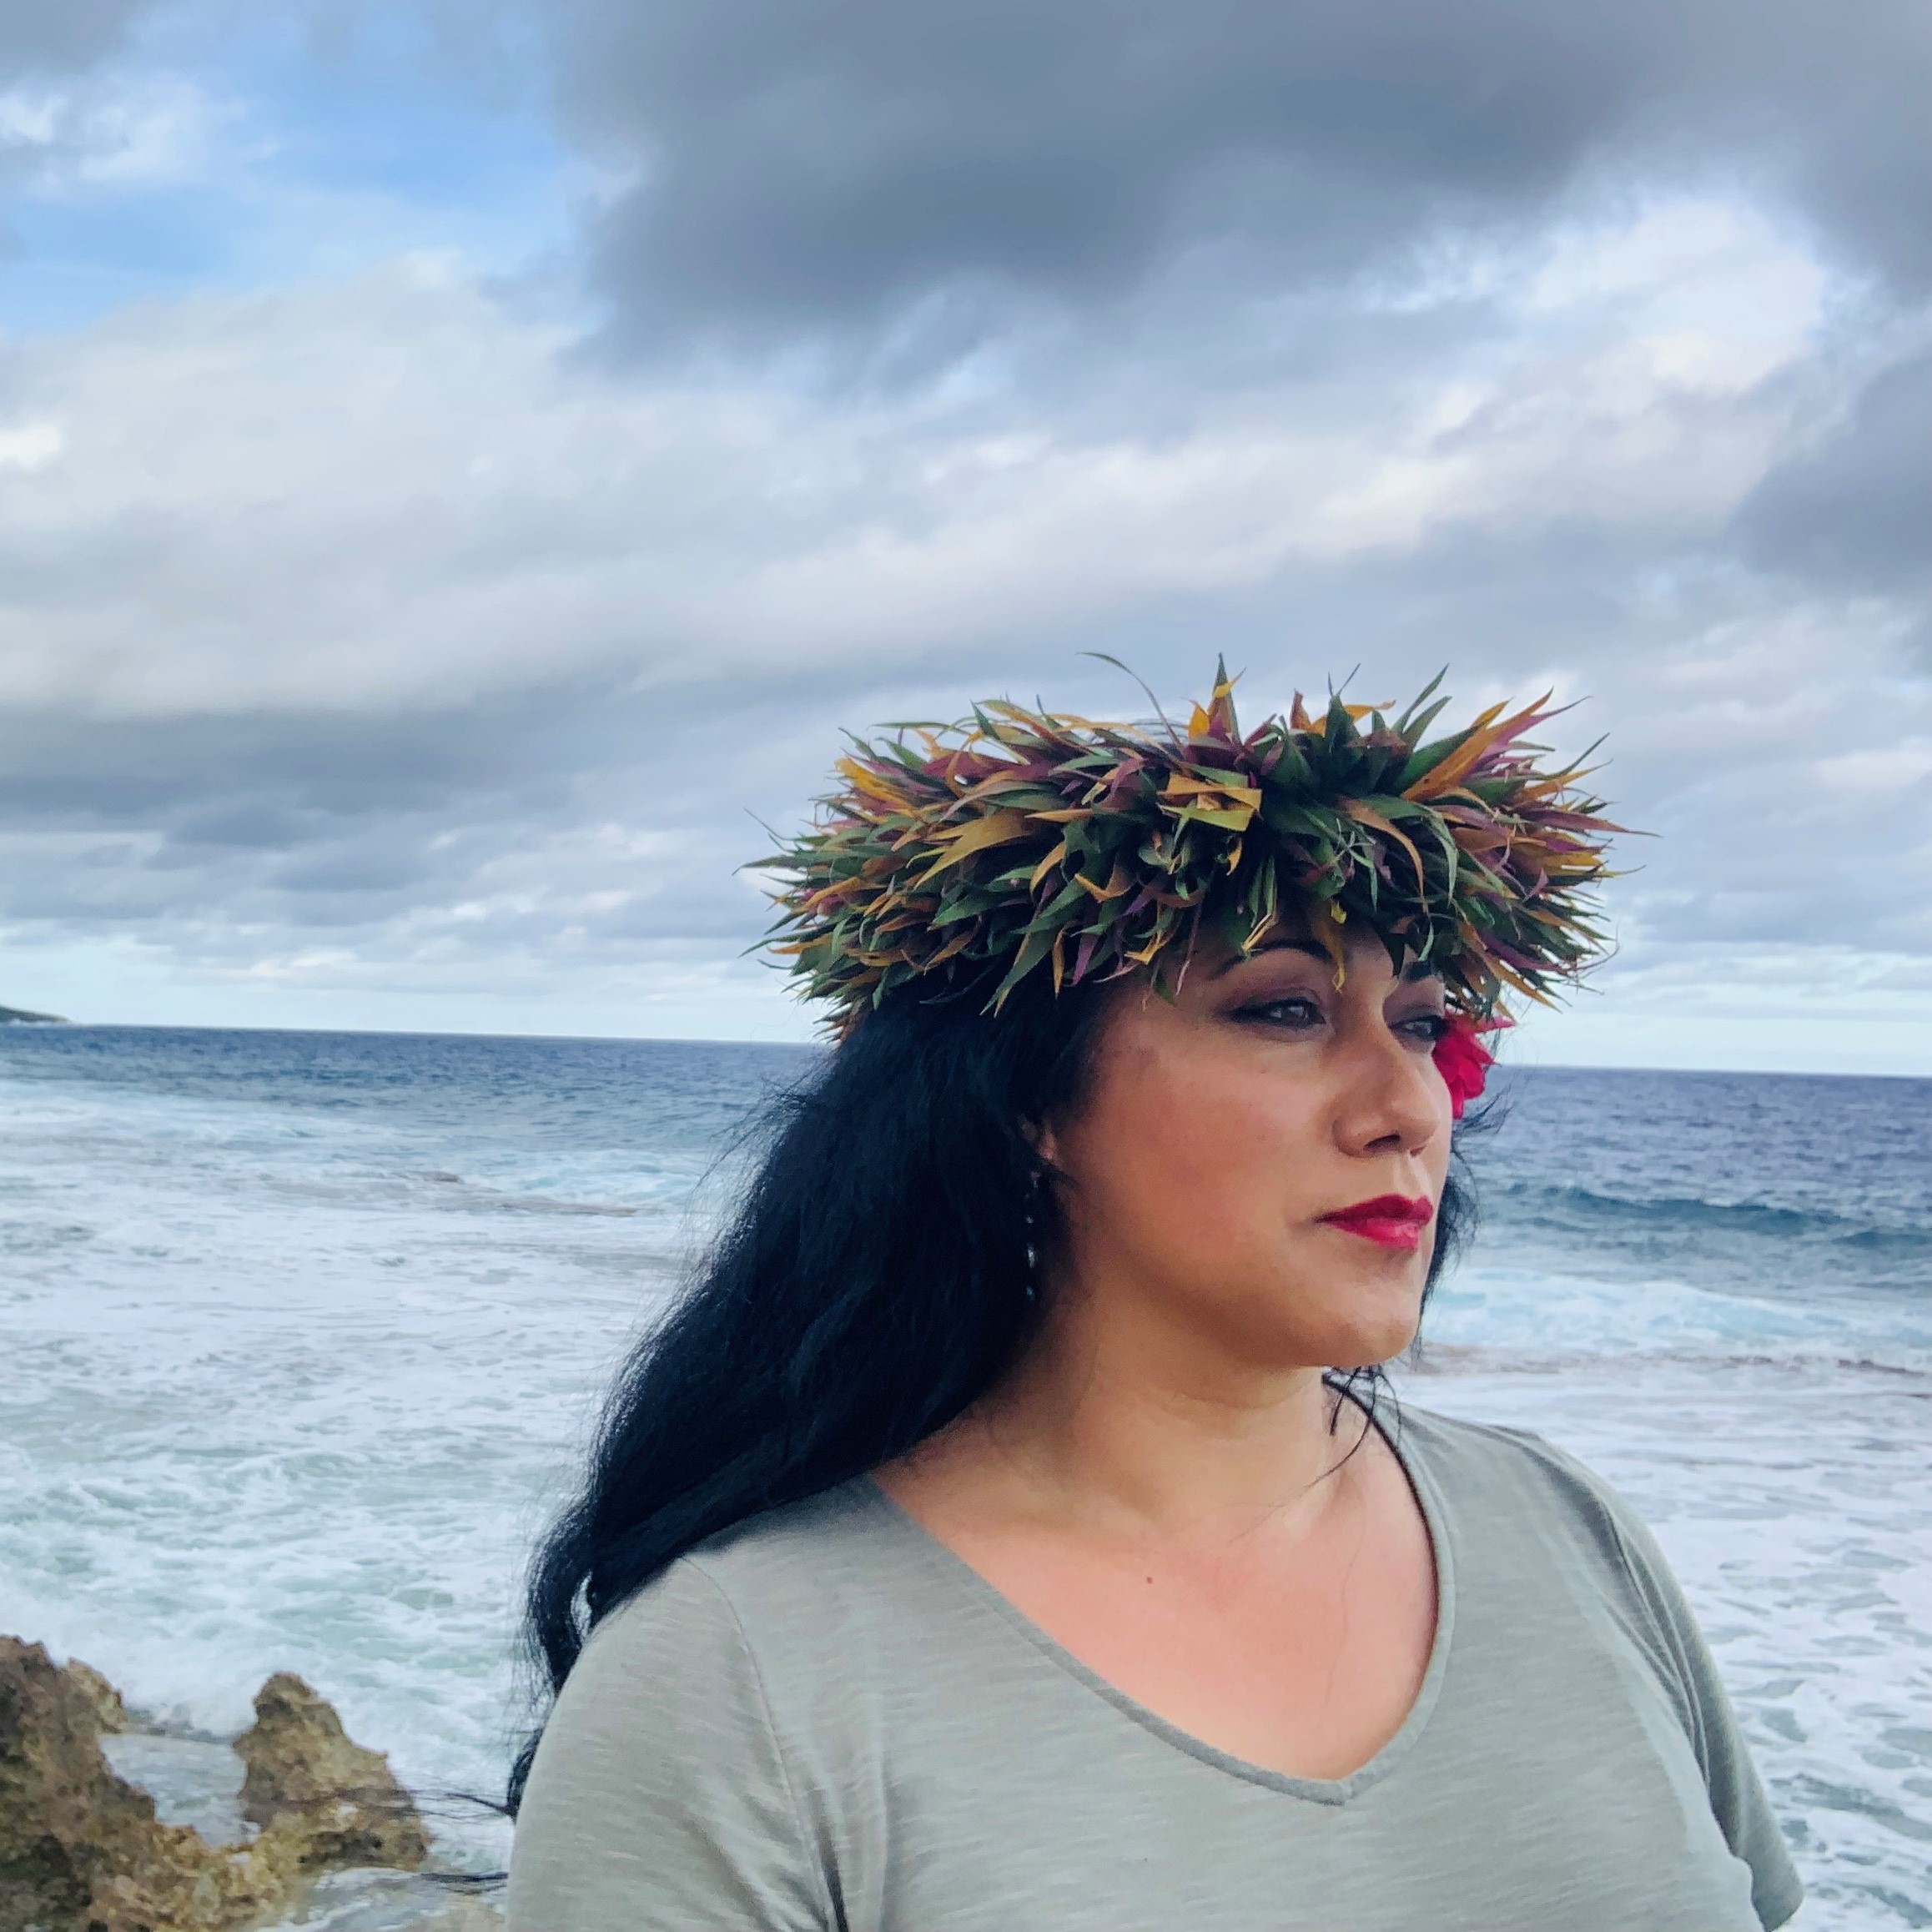 <p><strong>Phylesha Brown-Acton, MNZM &nbsp;</strong></p>

<p>Phylesha Brown-Acton hails from the village of Fineone Hakupu Atua, Niue. She is the Executive Director of F&lsquo;INE Pasifika Aotearoa Trust, a charitable entity that serves the needs and aspirations of MVPFAFF+/Pasifika LGBTQIA+, Rainbow and Queer peoples and their families by providing Whānau Ora support and care.  &nbsp;</p>

<p>Brown-Acton is a human rights defender and trans activist. She has extensive governance experience and is a world champion netball player, a retired professional dancer, an award-winning Polynesian costume designer and a baker. Brown-Acton is an avid weaver (lalaga Niue) and enjoys the reciprocal communication and collective knowledge transfer concepts that weaving practices embody and gift onto others</p>

<p>Image credit: Phylesha Brown-Acton</p>